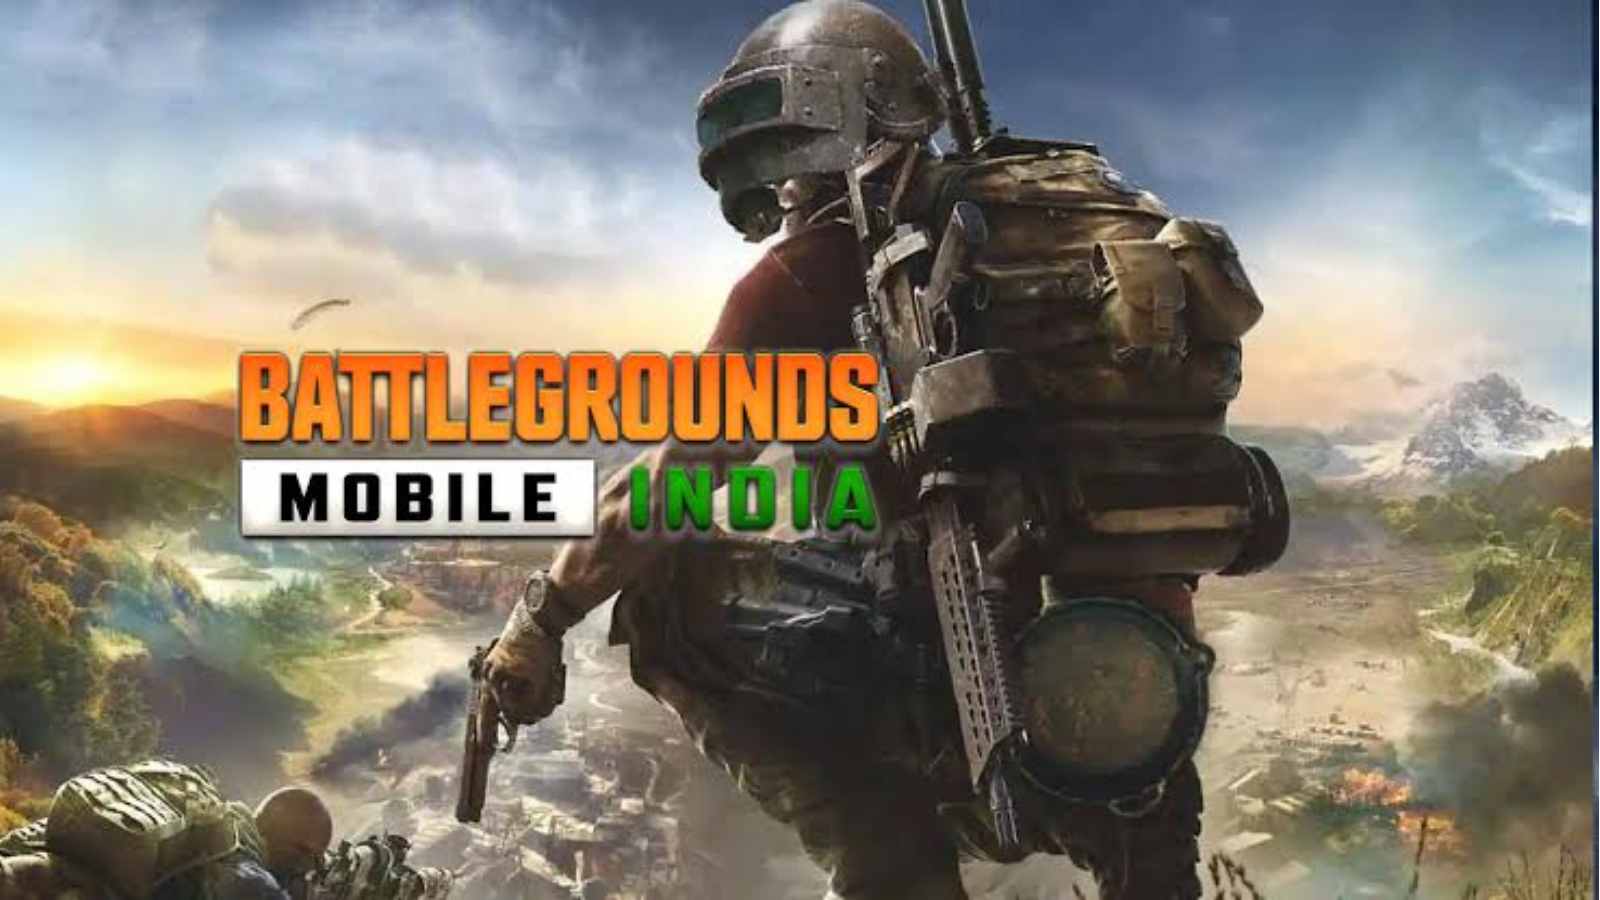 Is Battlegrounds Mobile India (BGMI) Unban in the Cards? Here's a Look at  the Possibilities - MySmartPrice